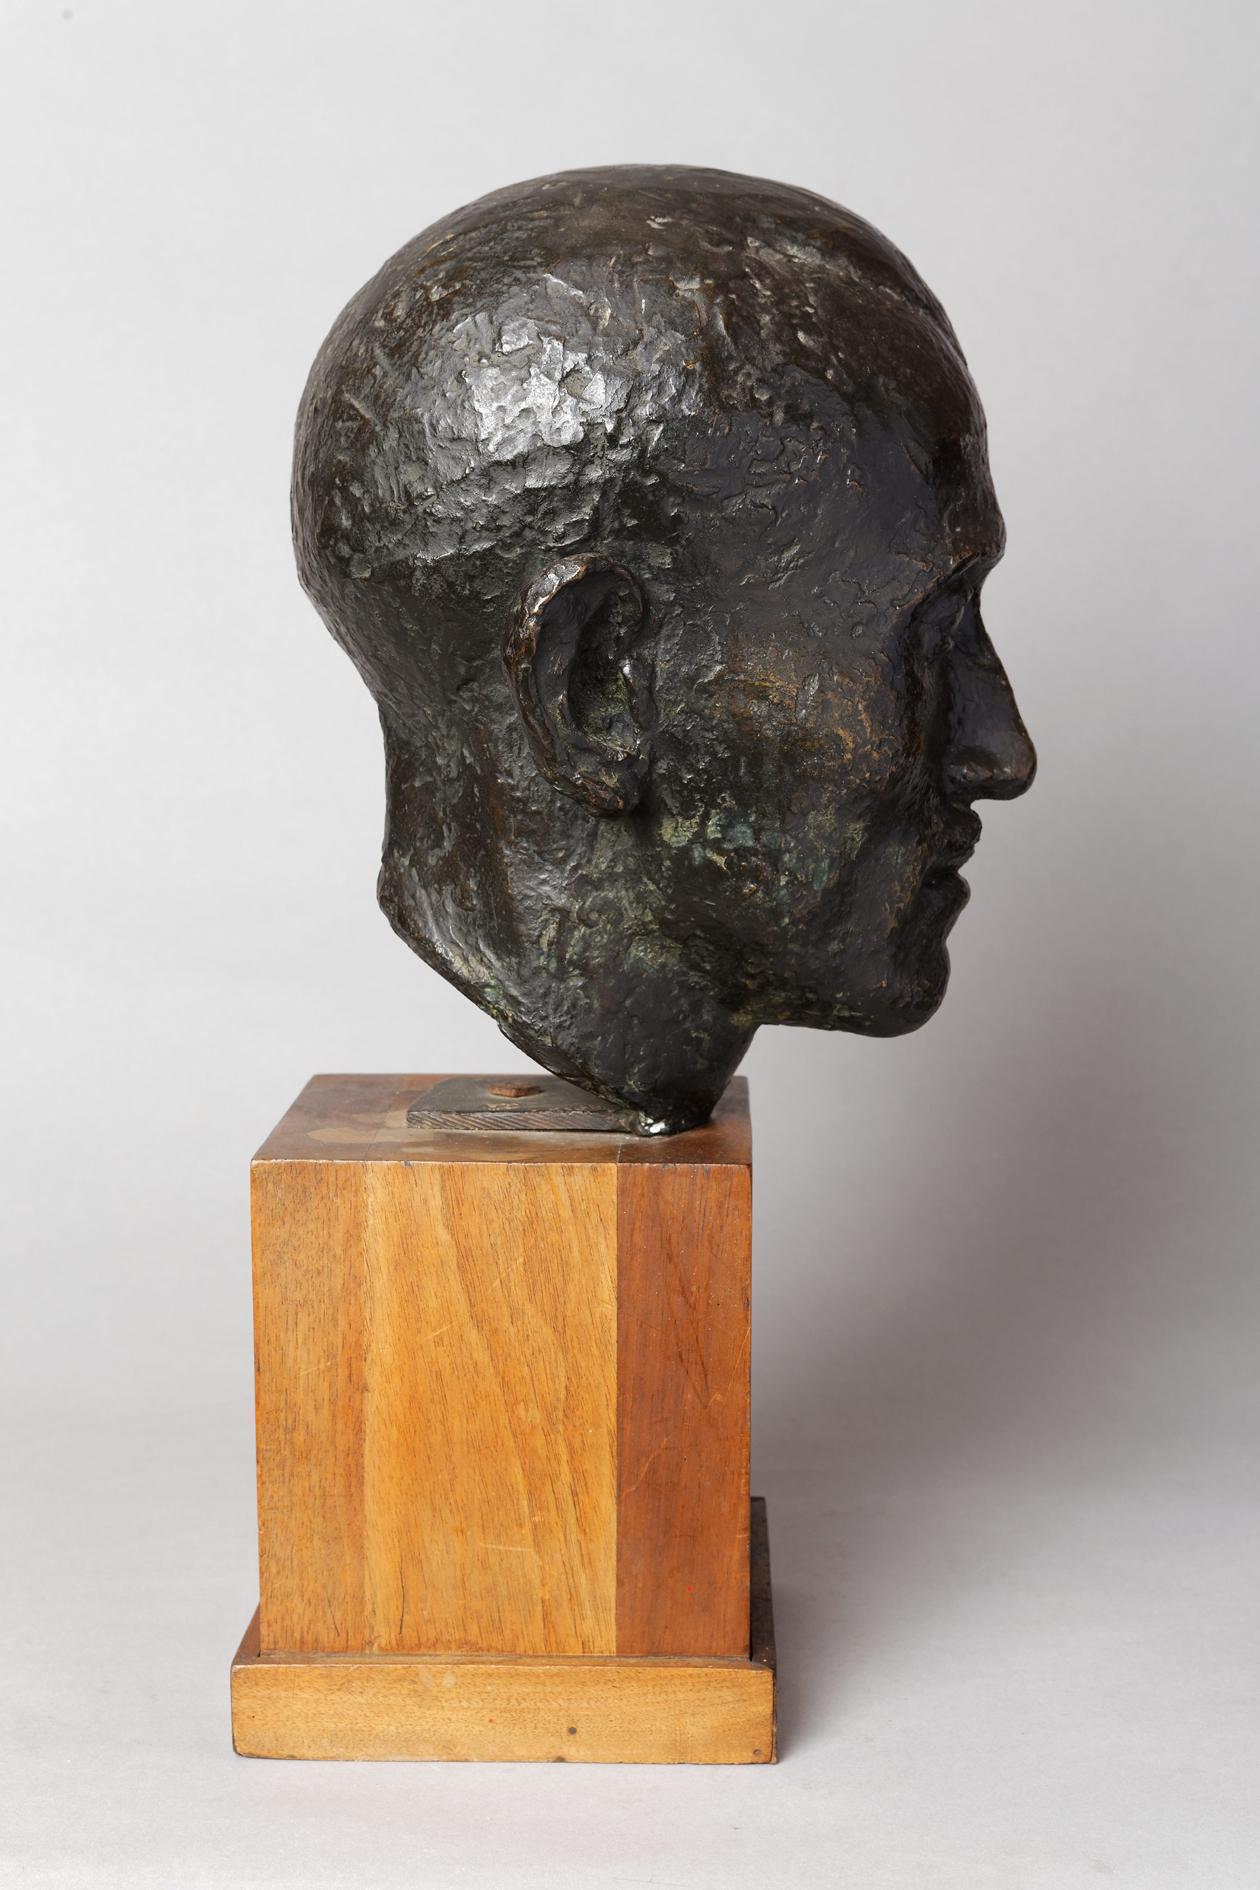 Portrait of a Man
by Marcel GIMOND (1894-1961)

Bronze with a very nuanced dark brown patina
signed on the neck with the monogram 